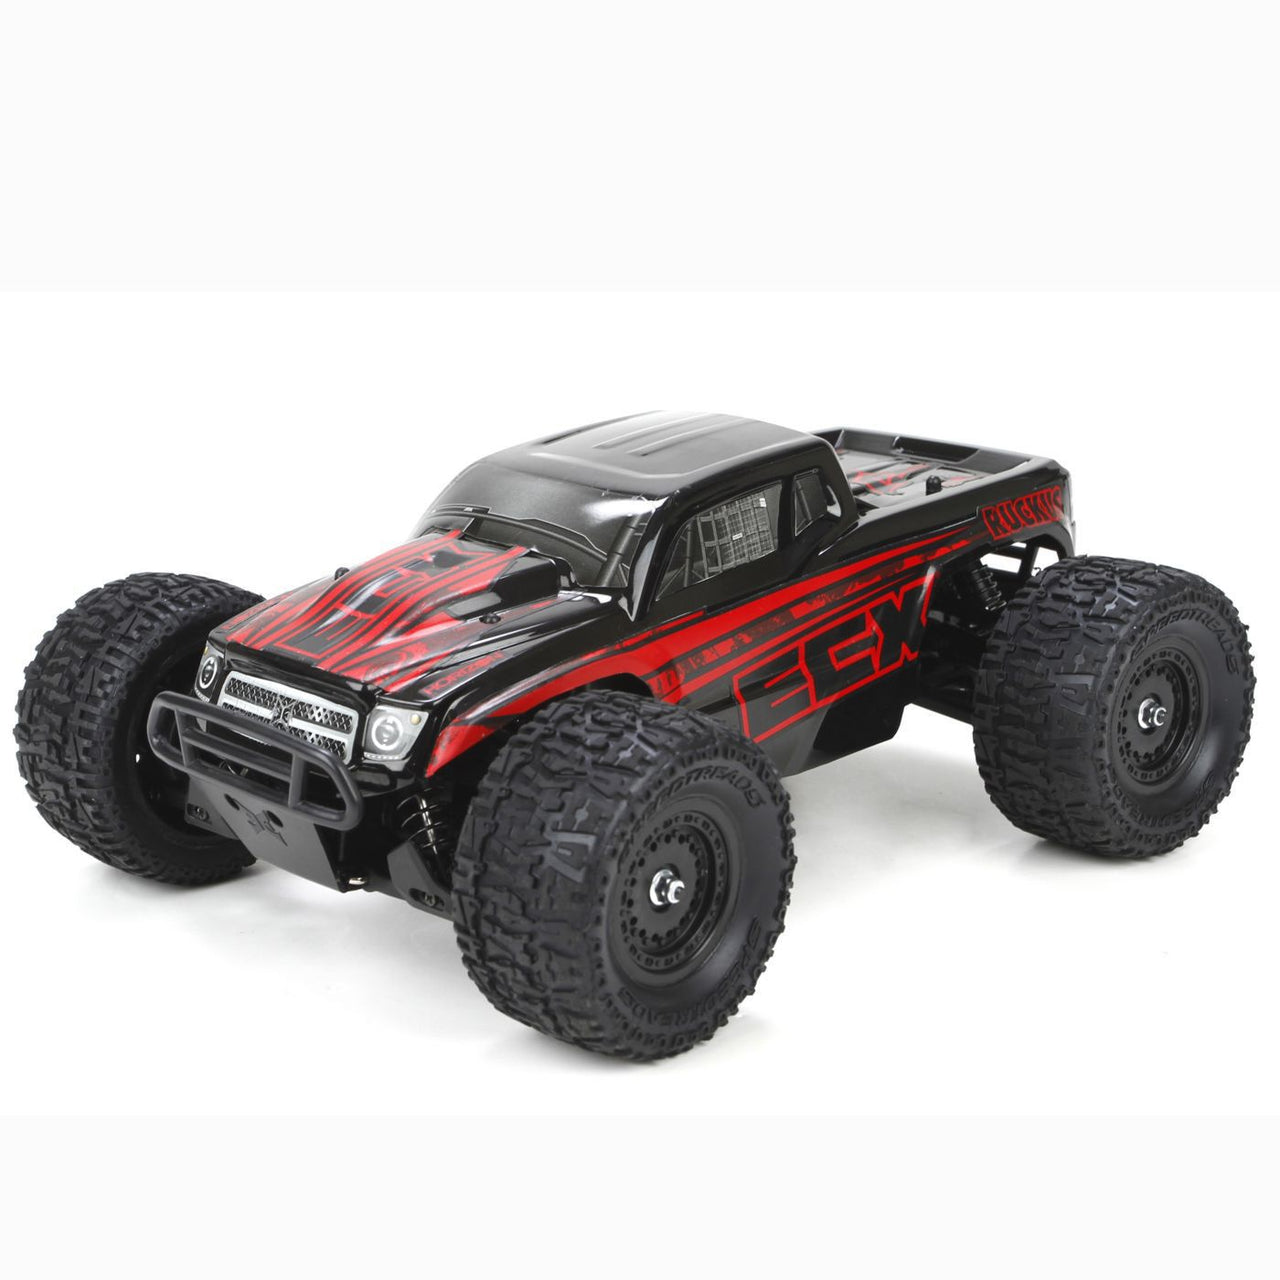 ECX01000T1 ECX Ruckus 1/18 4WD RTR, Black/Red (store pick-up only)